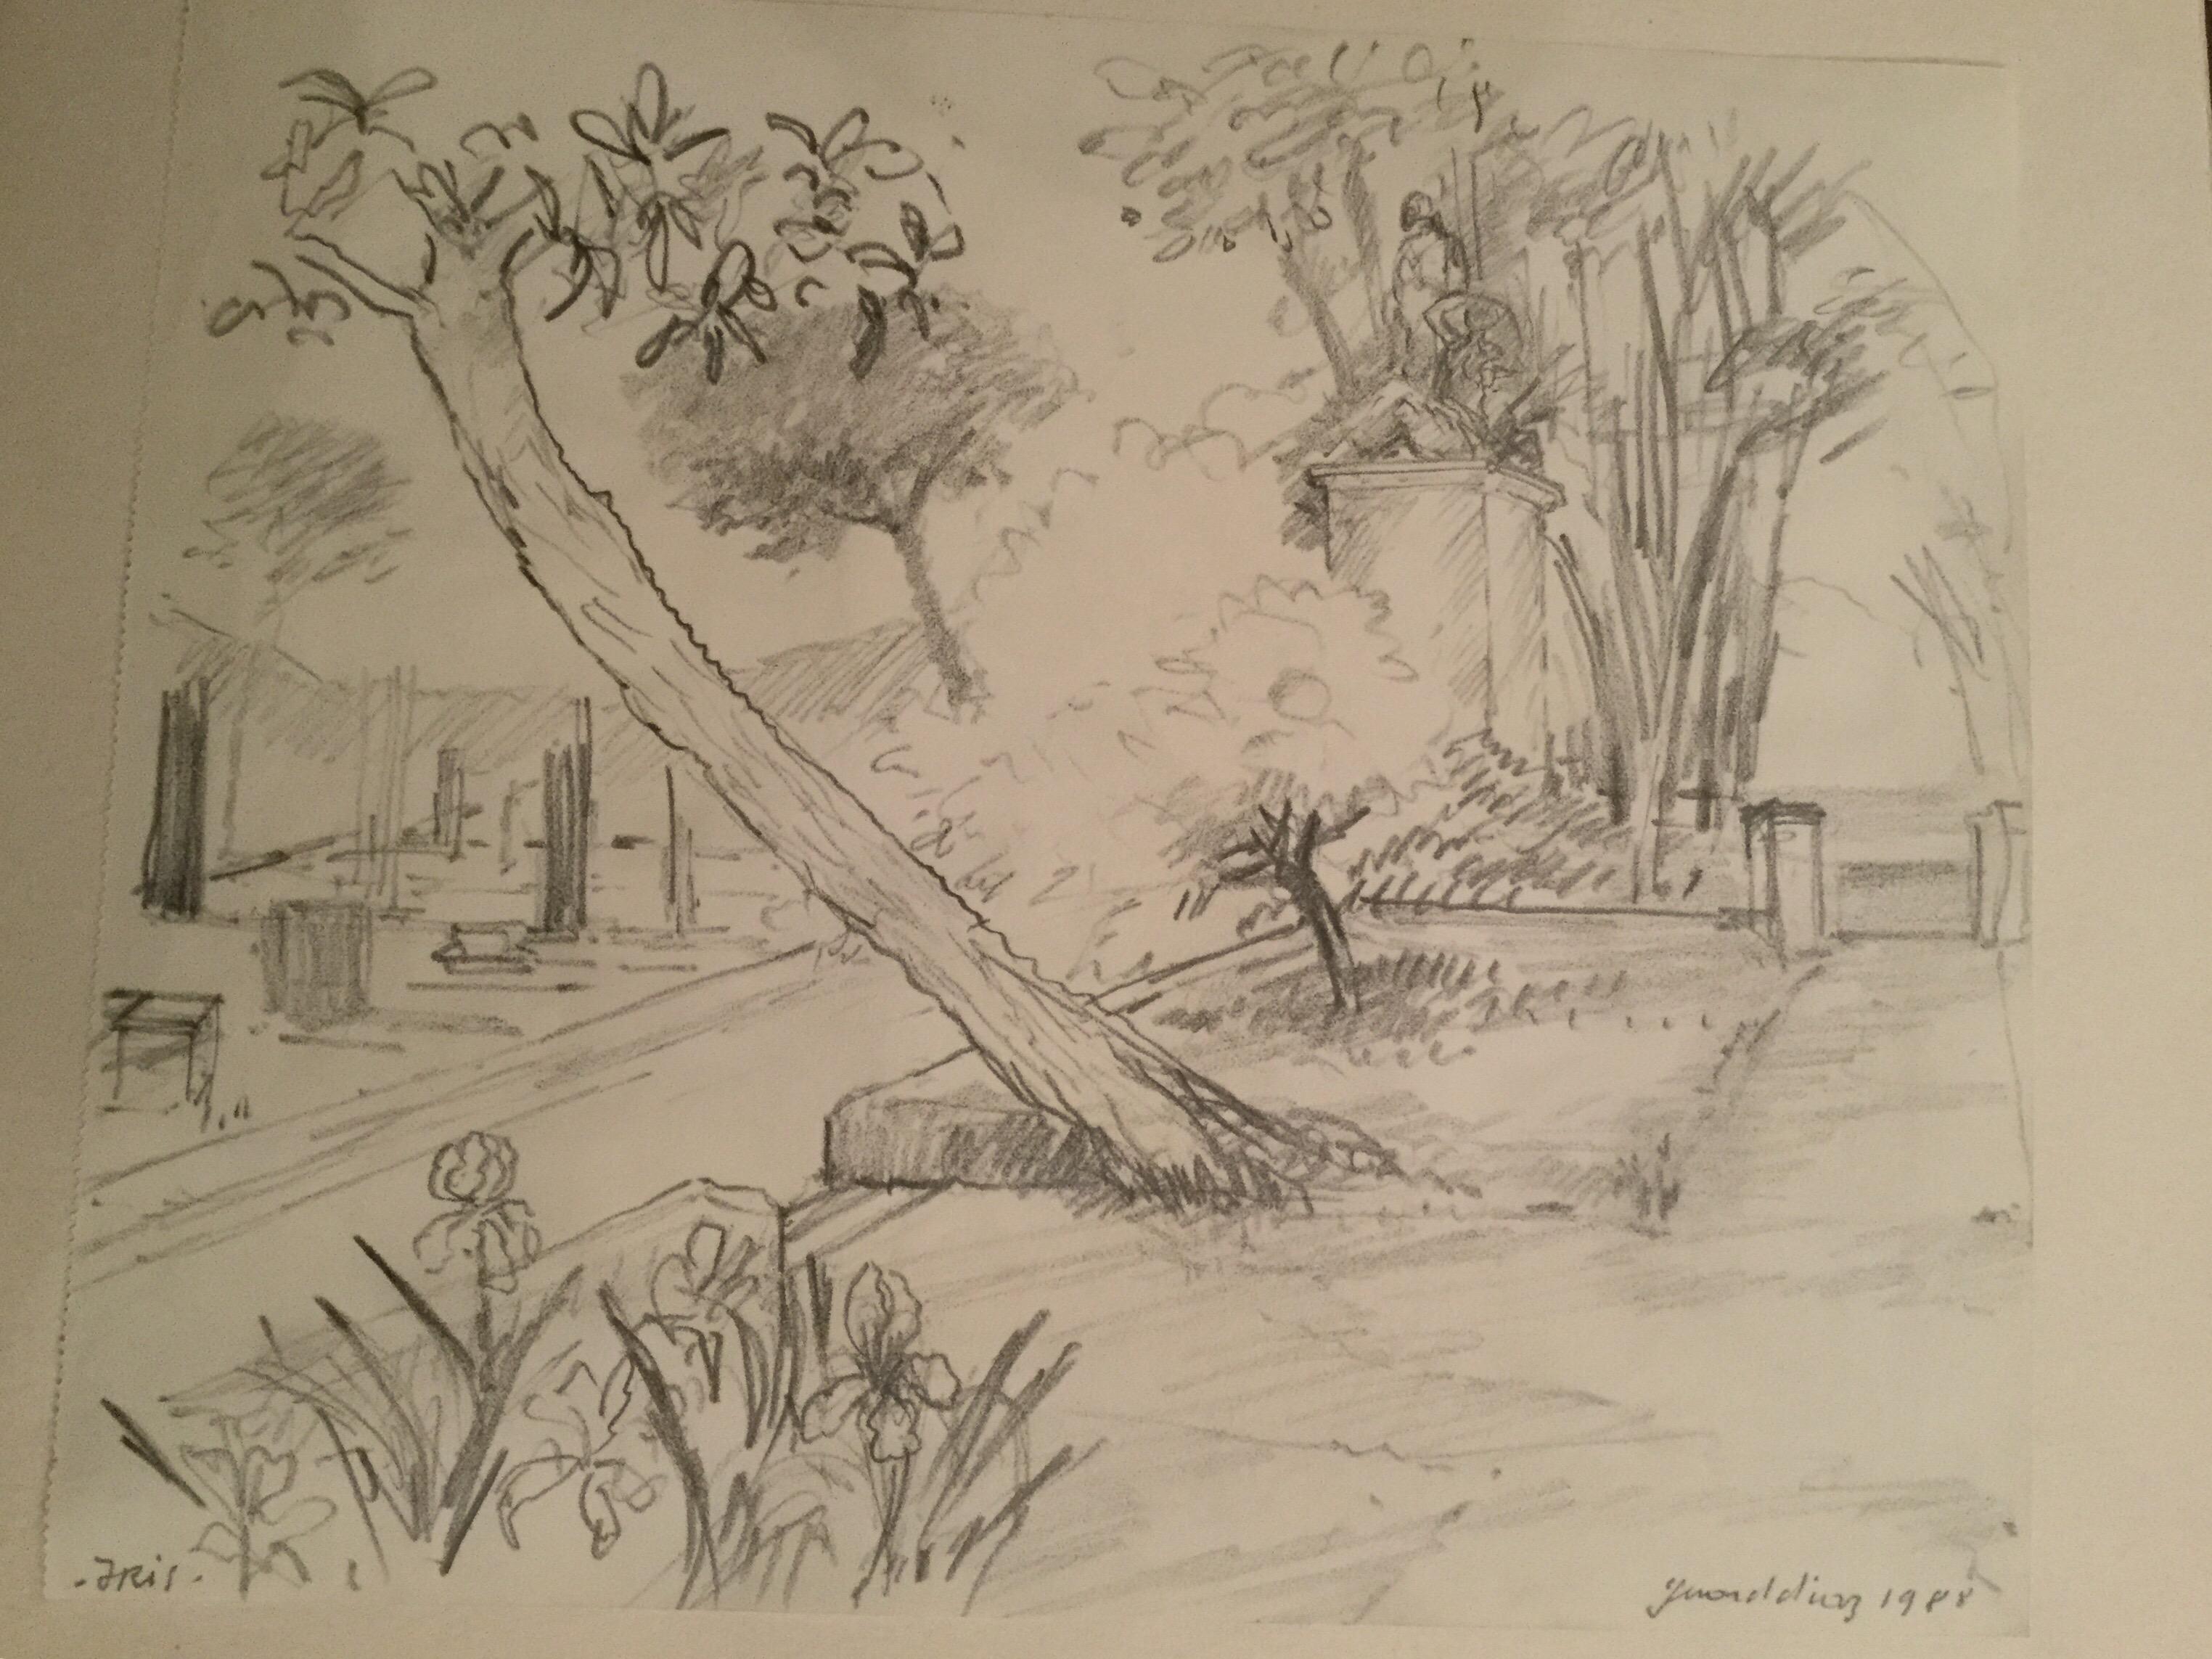 This drawing is a view of a garden.
In the background, we see a high base topped by a statue of a 19th century figure along with other architectural ruins.
Central to the composition is a leafy tree with a leaning trunk.
The beautiful flowering iris